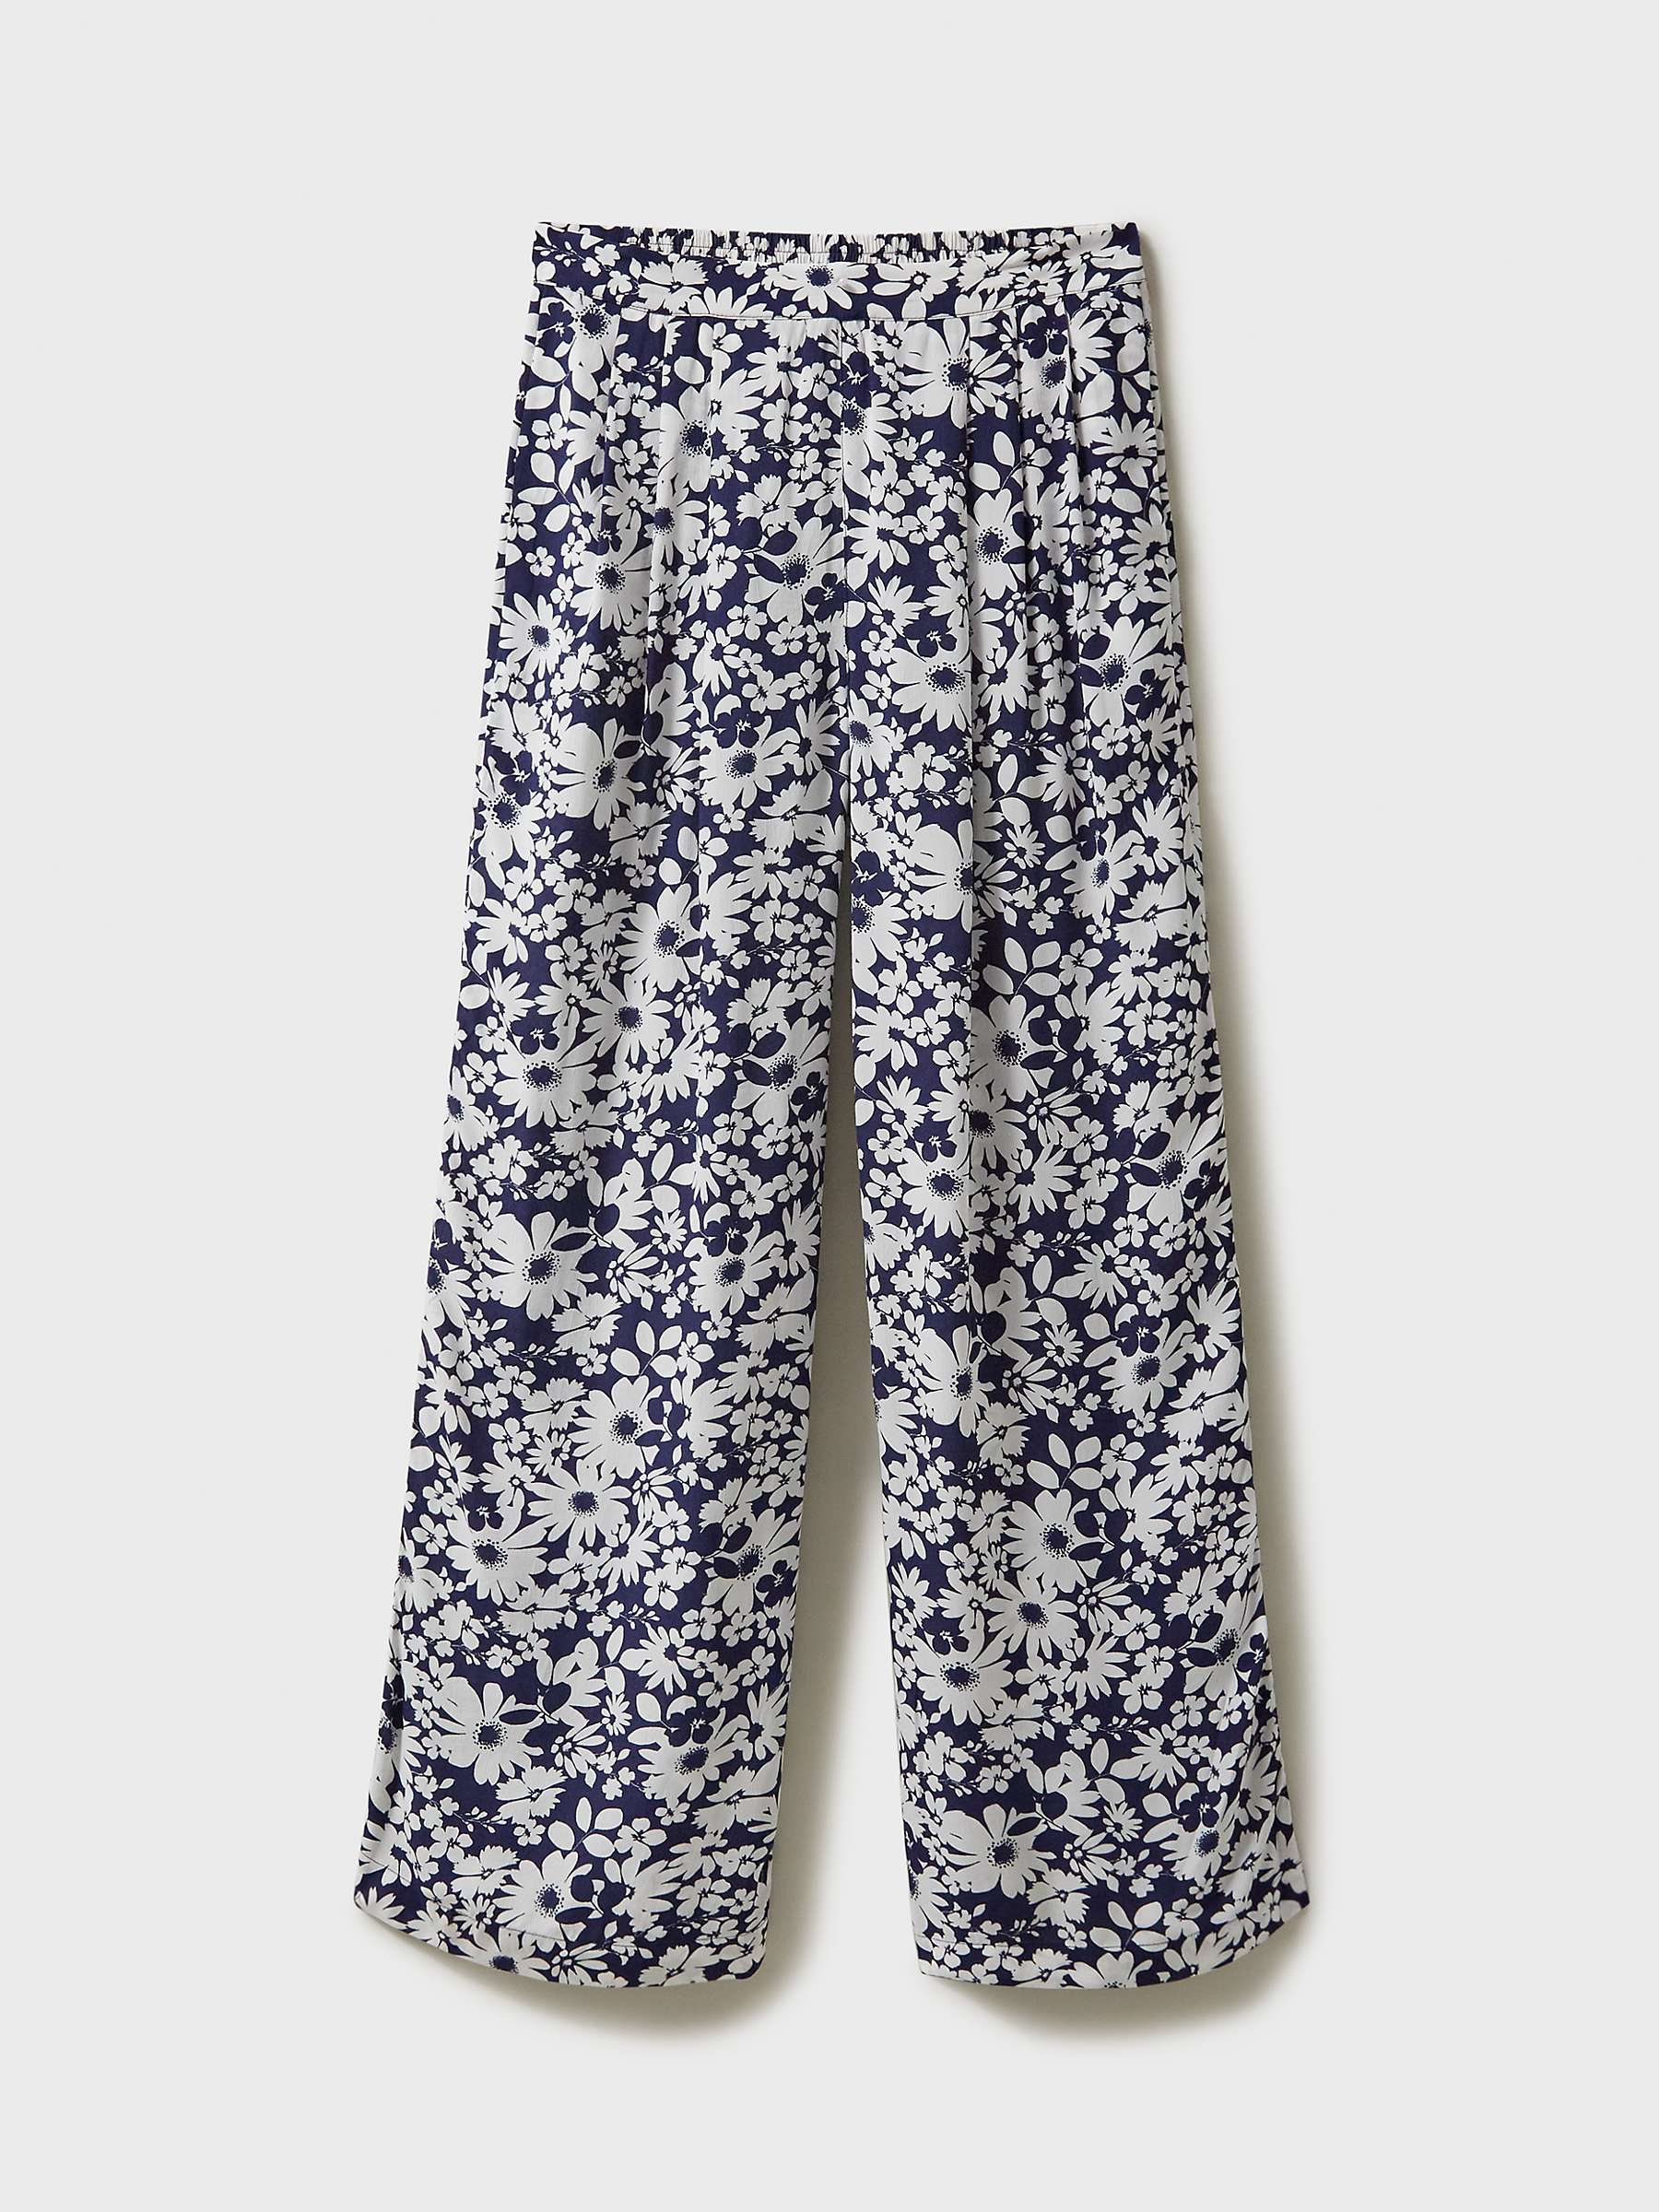 Buy Crew Clothing Dion Wide Leg Floral Print Trousers, Navy/White Online at johnlewis.com